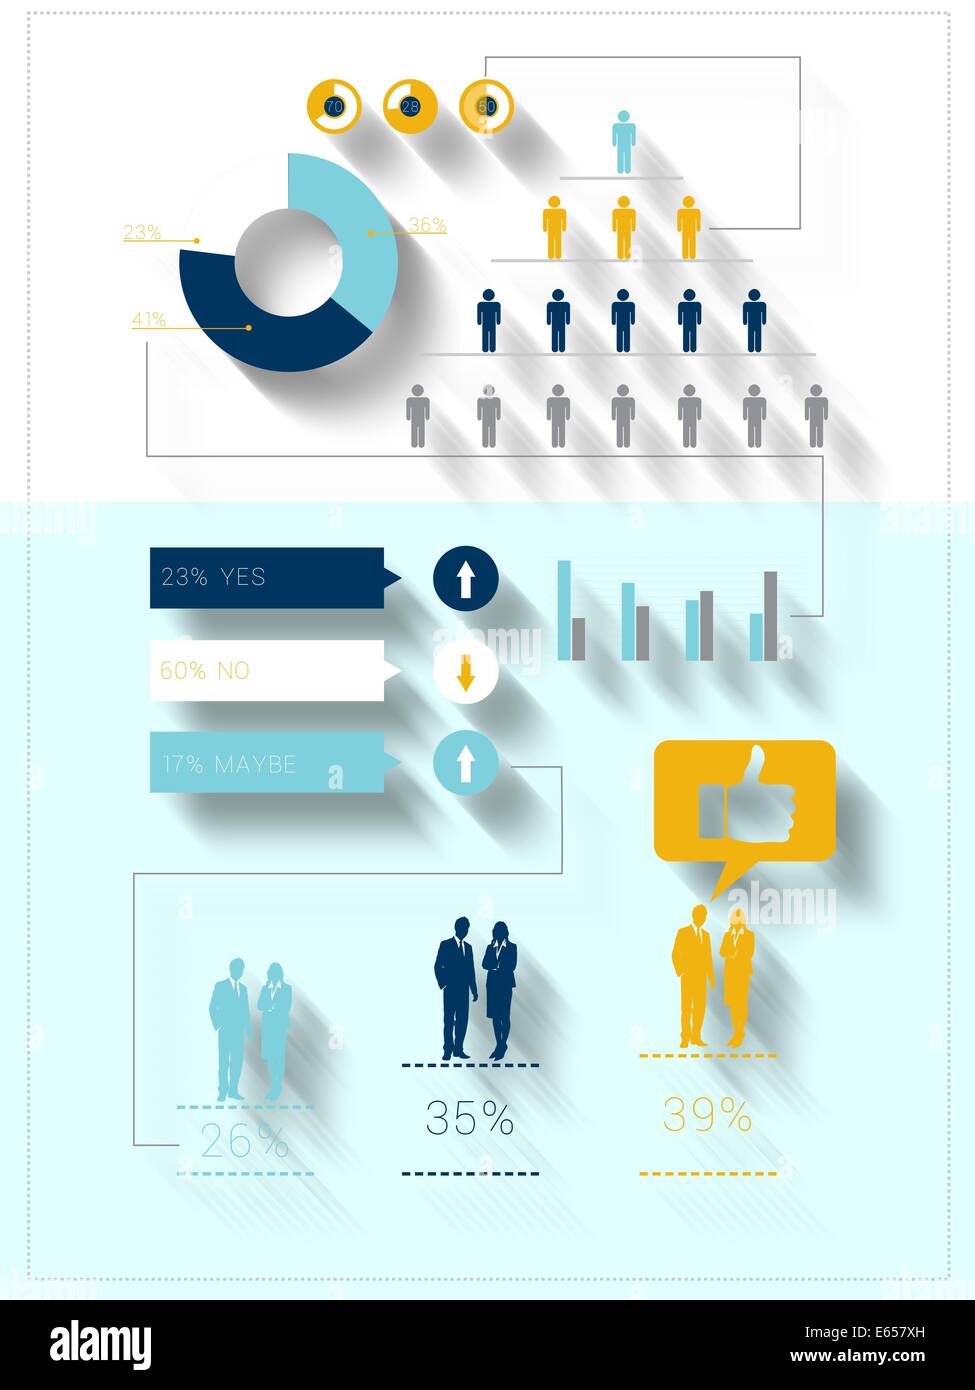 Digitally generated blue and yellow business infographic Stock Photo